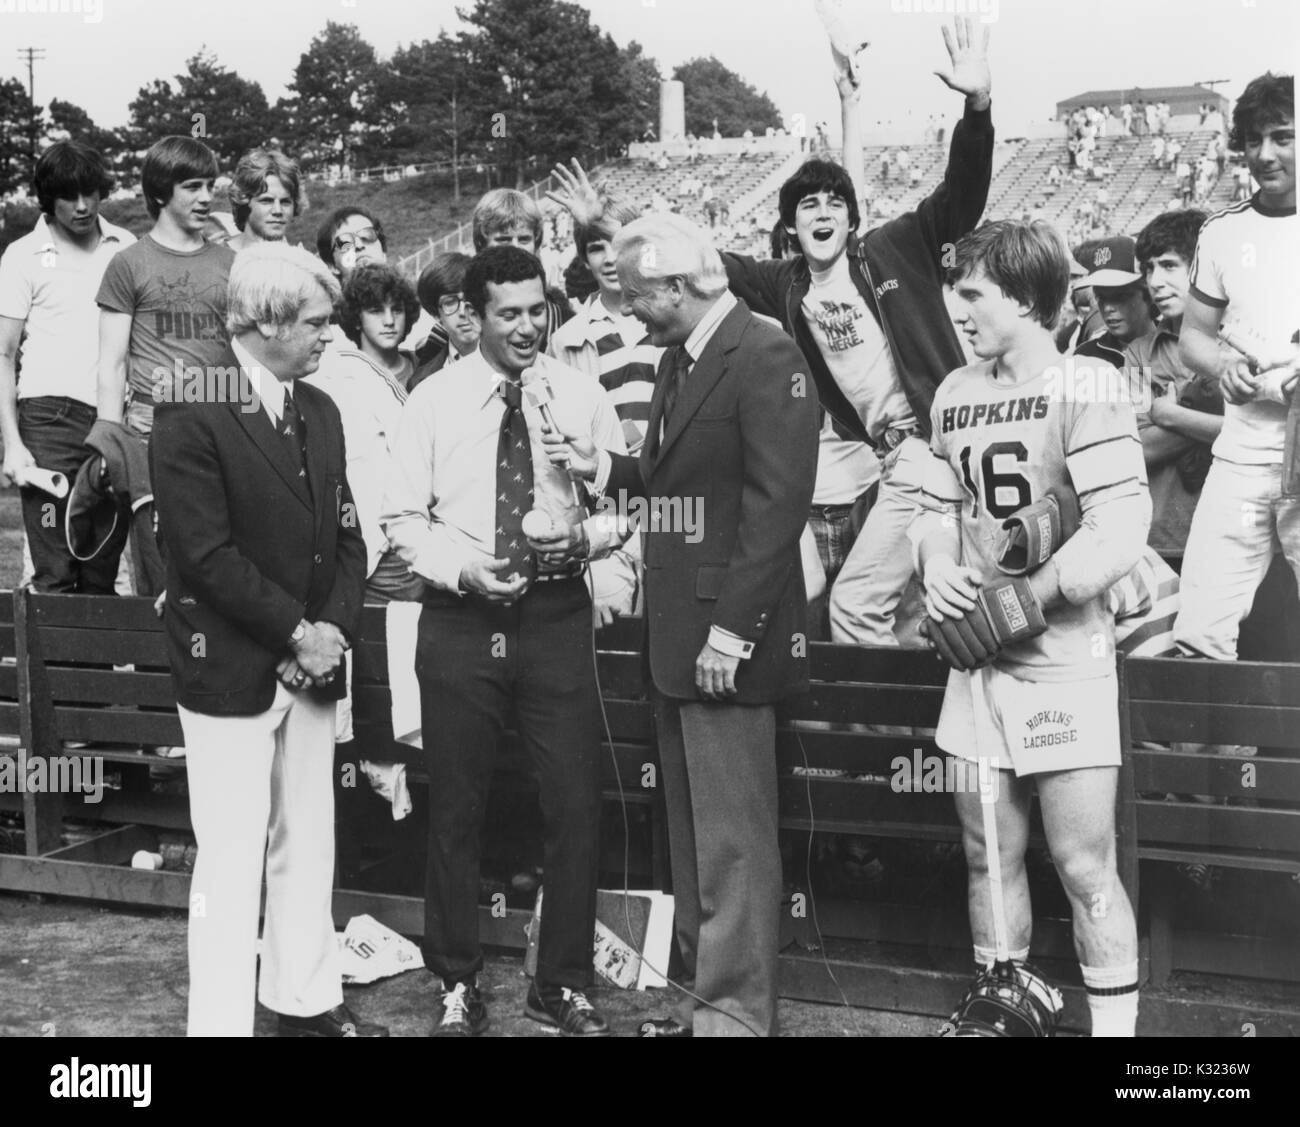 A man is speaking into a microphone during an interview for the 8th Annual NCAA Division One Championships, while spectators watch and try to make a scene for the camera, with a Johns Hopkins lacrosse player standing by, 1978. Stock Photo